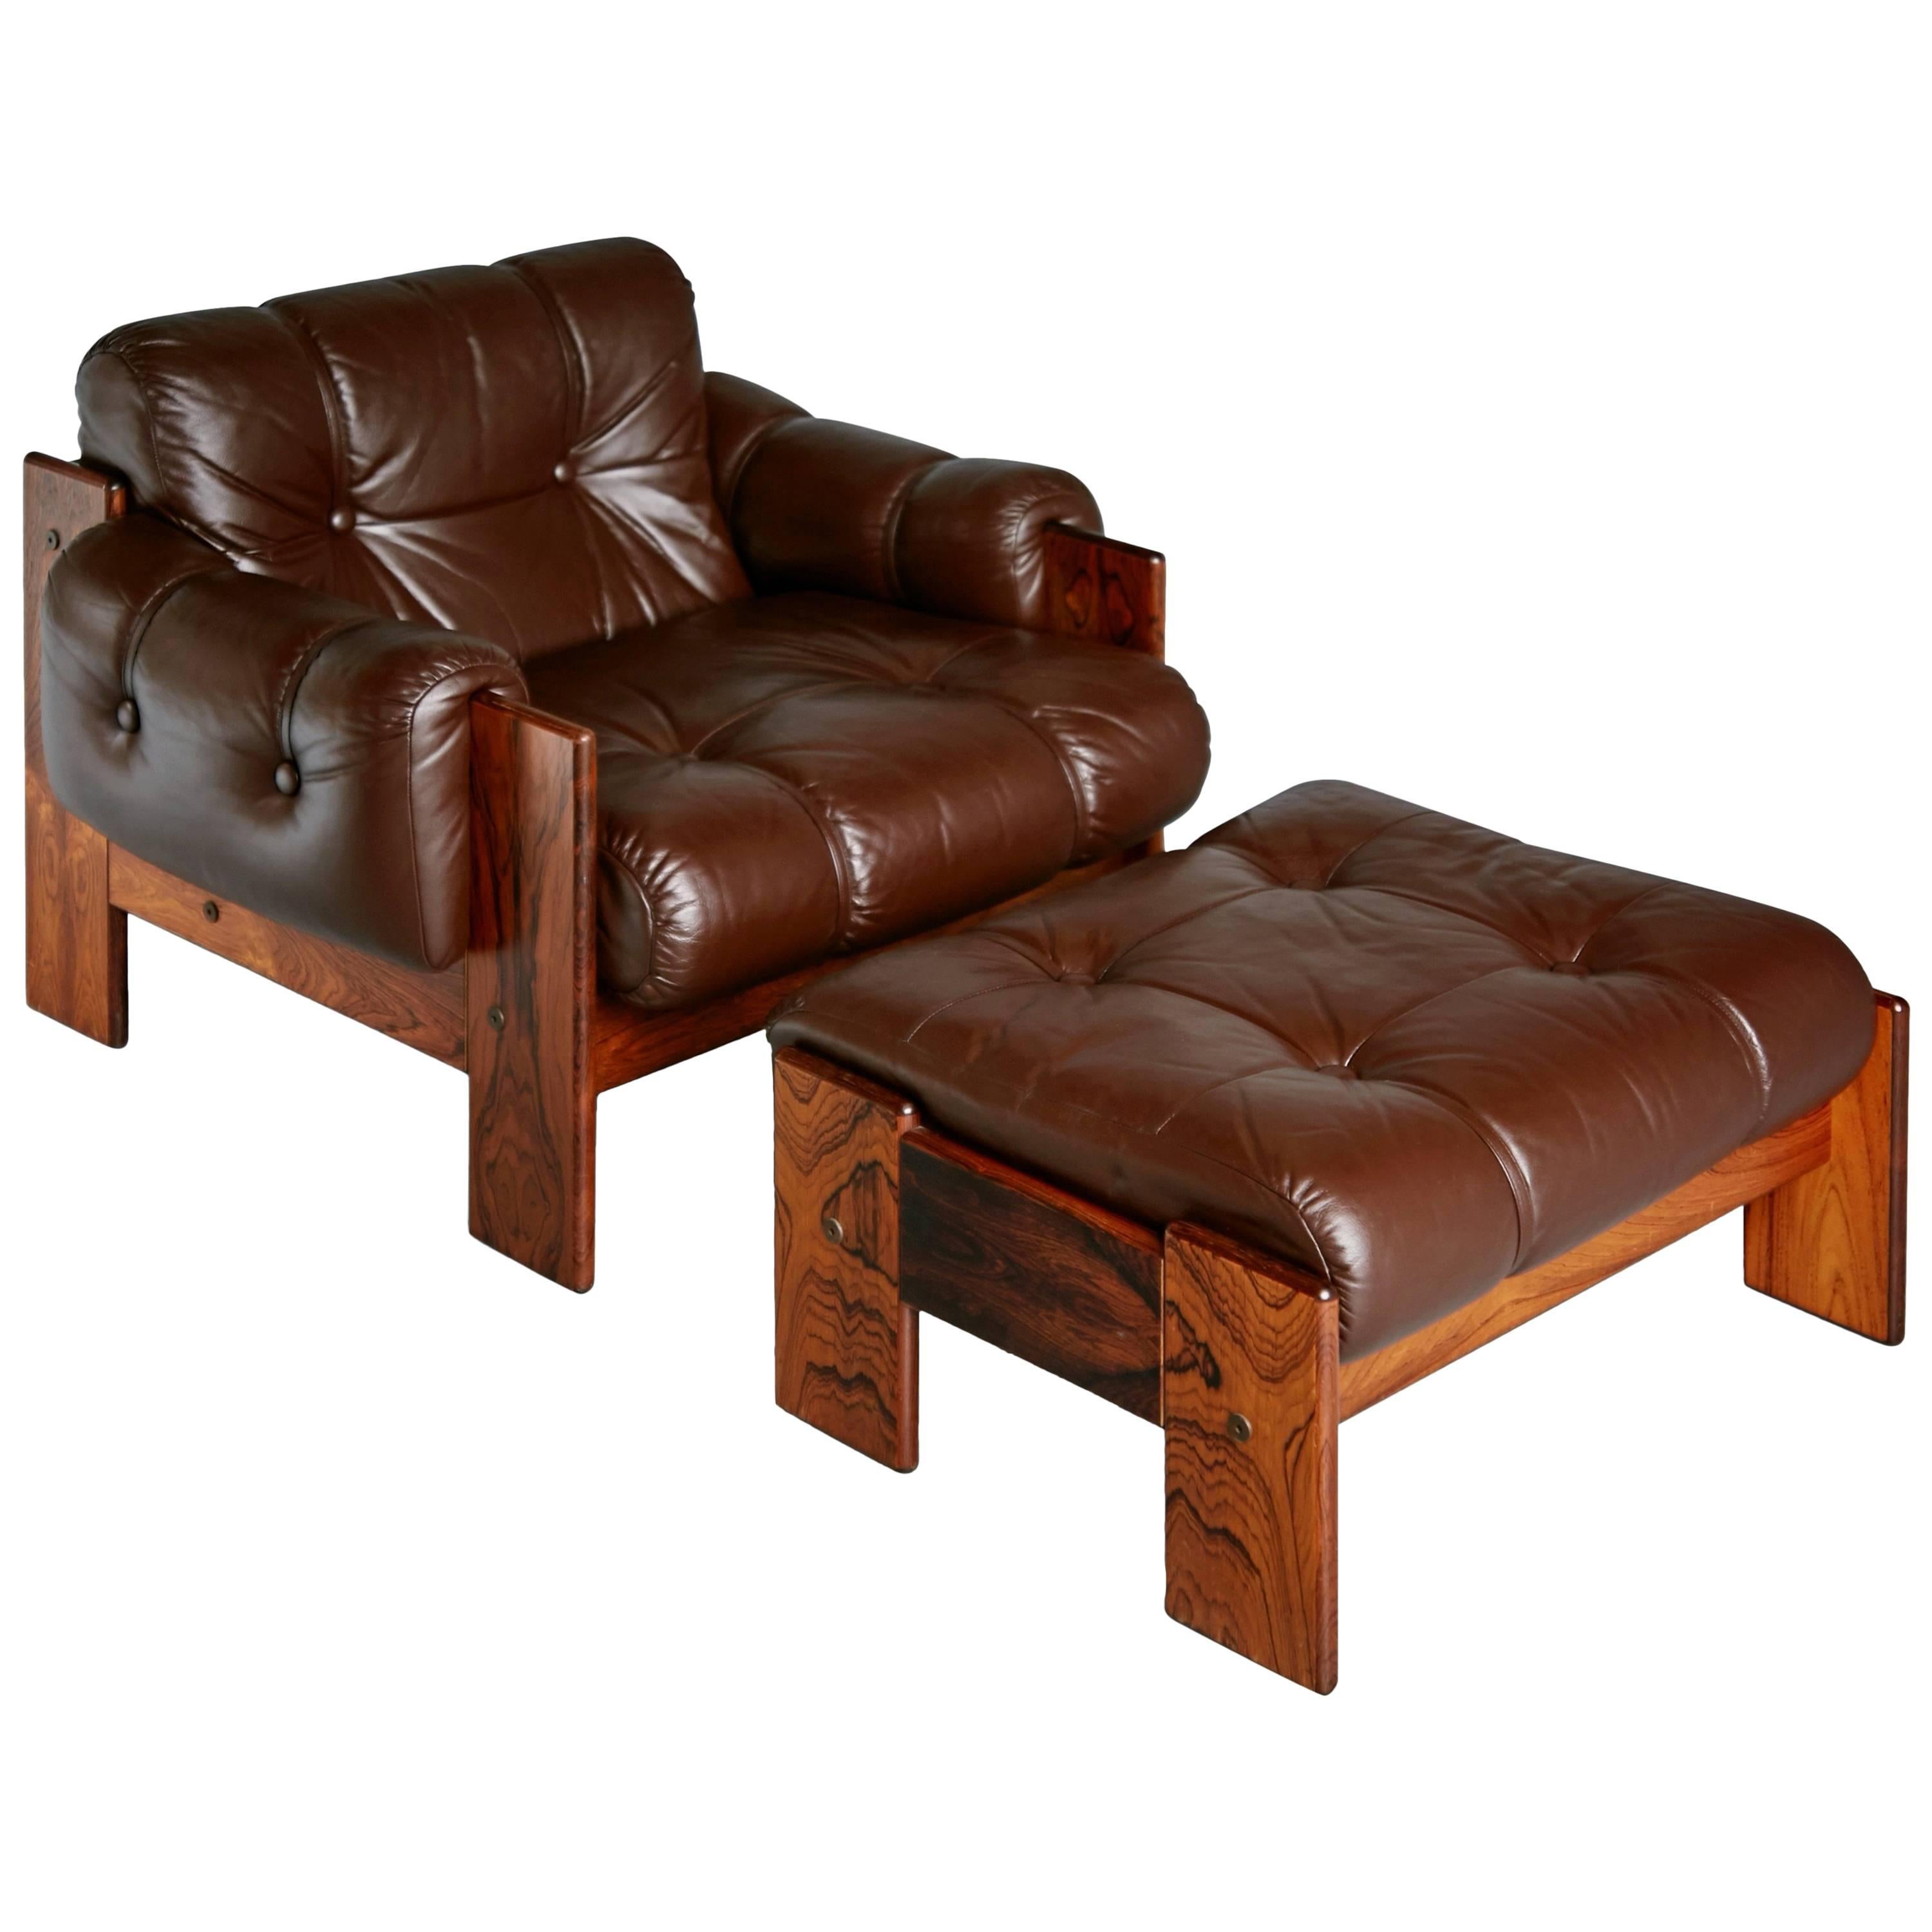 Tufted Leather Lounge Chair and Ottoman by Kalustekiila, Finland, circa 1950